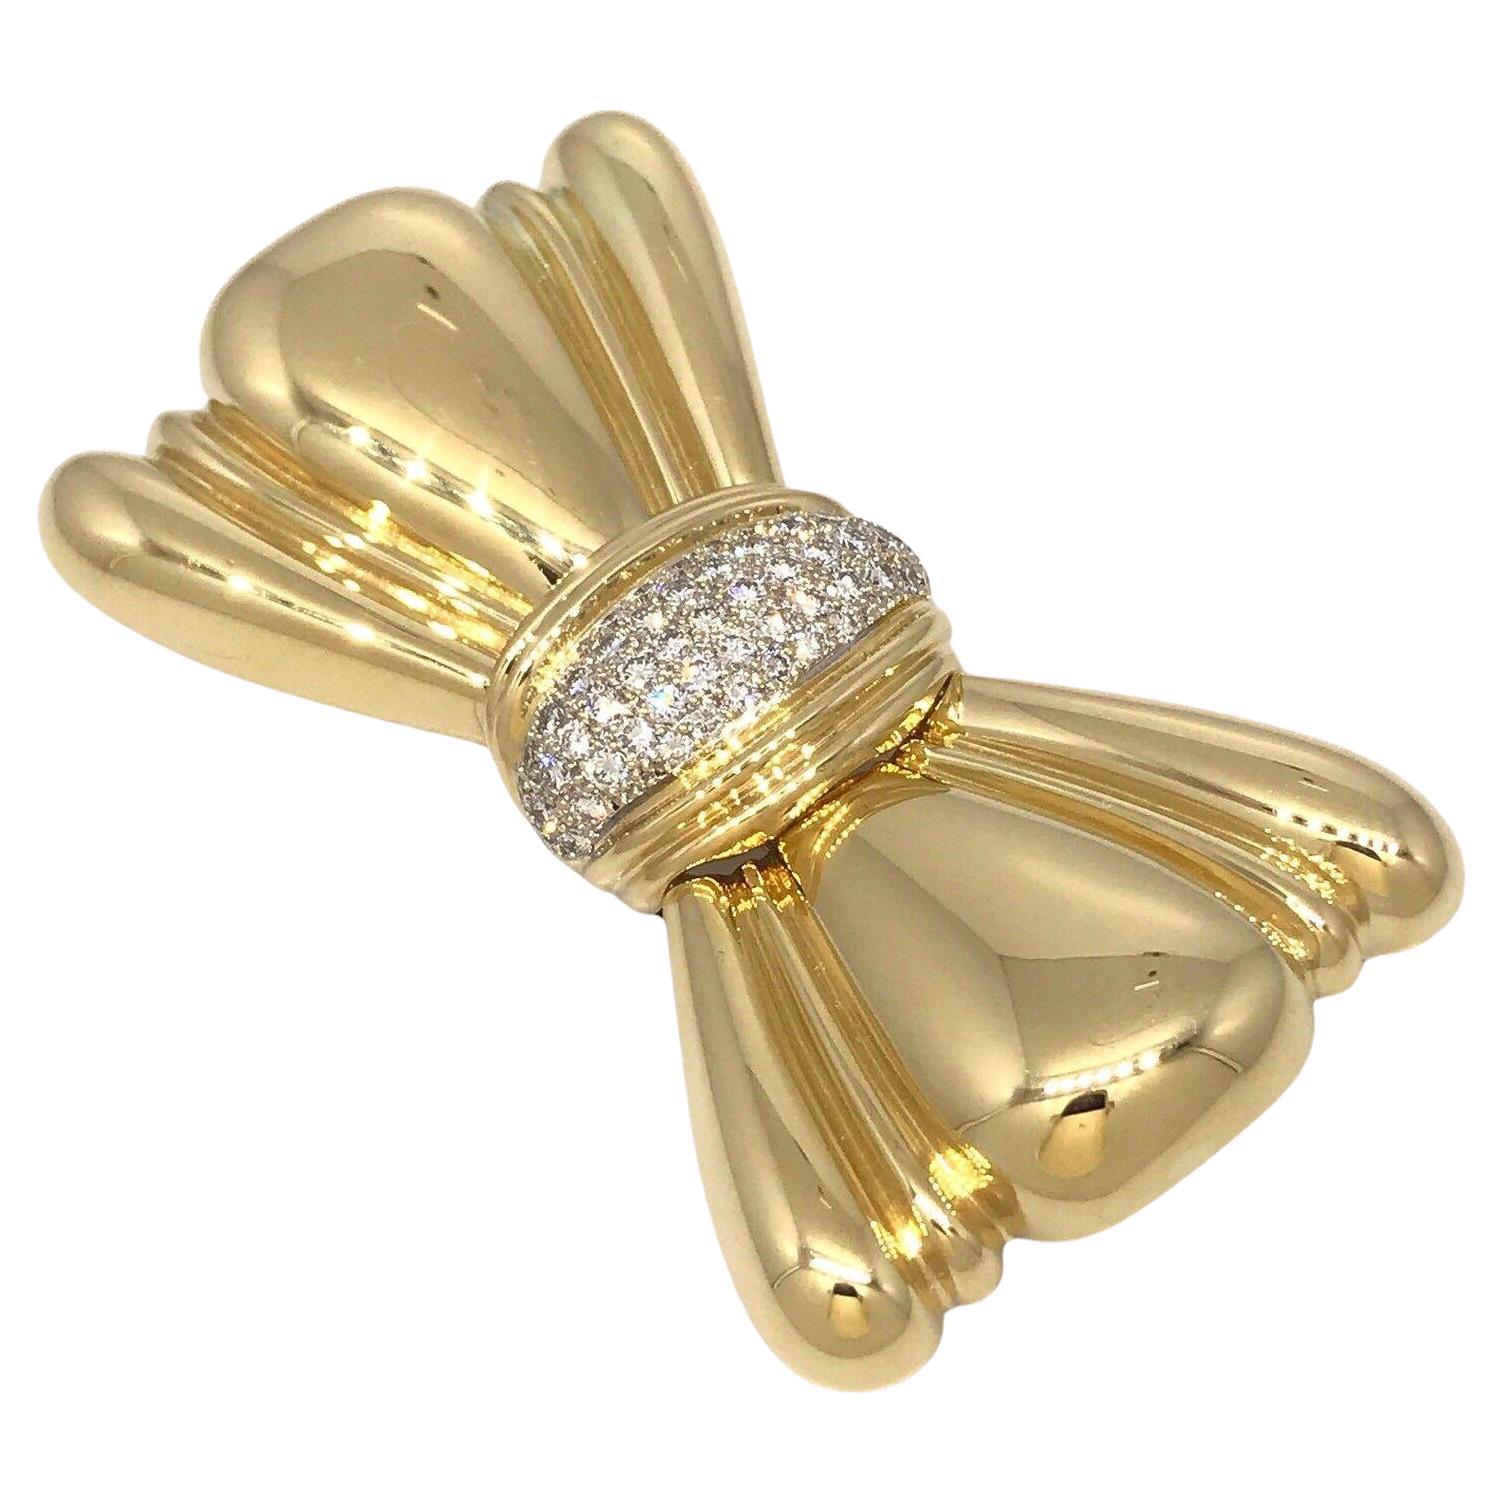 Large Bow Pin Brooch with Pave Diamonds in 18k Yellow Gold

Large Bow Pin with Diamonds features a Bow Design in High polished 18k Yellow Gold with the bow knot encrusted with 1.50 carats of Round Full cut Diamonds Pave set.

Pin measures 2.75